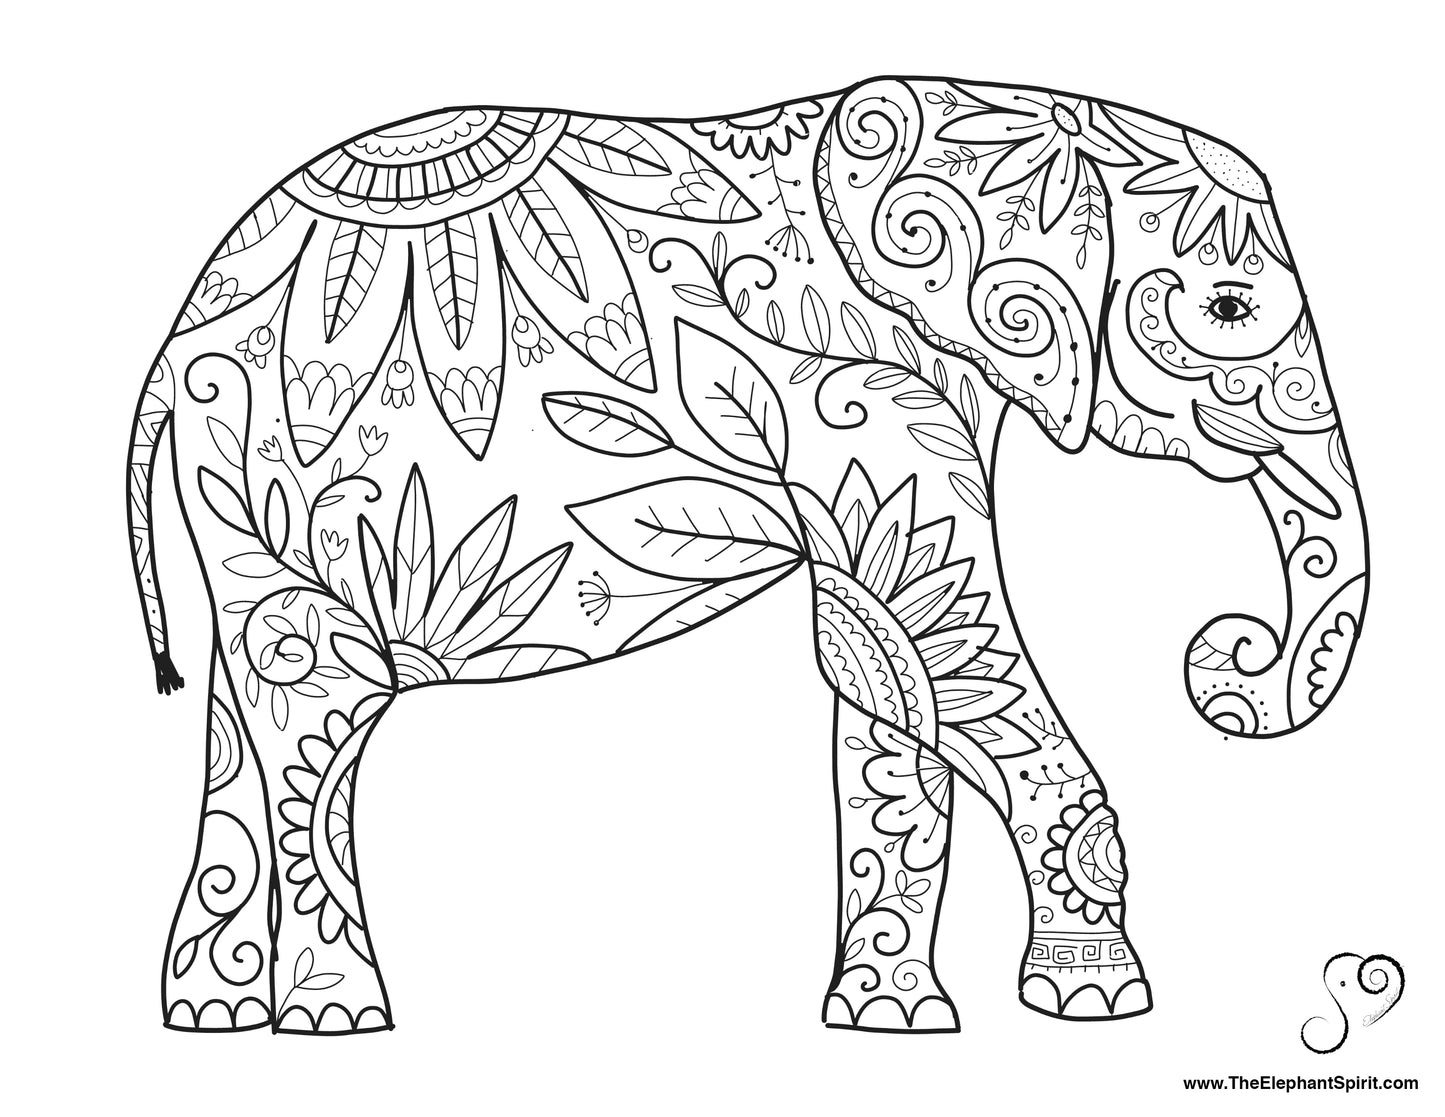 FREE Coloring Page 08-18